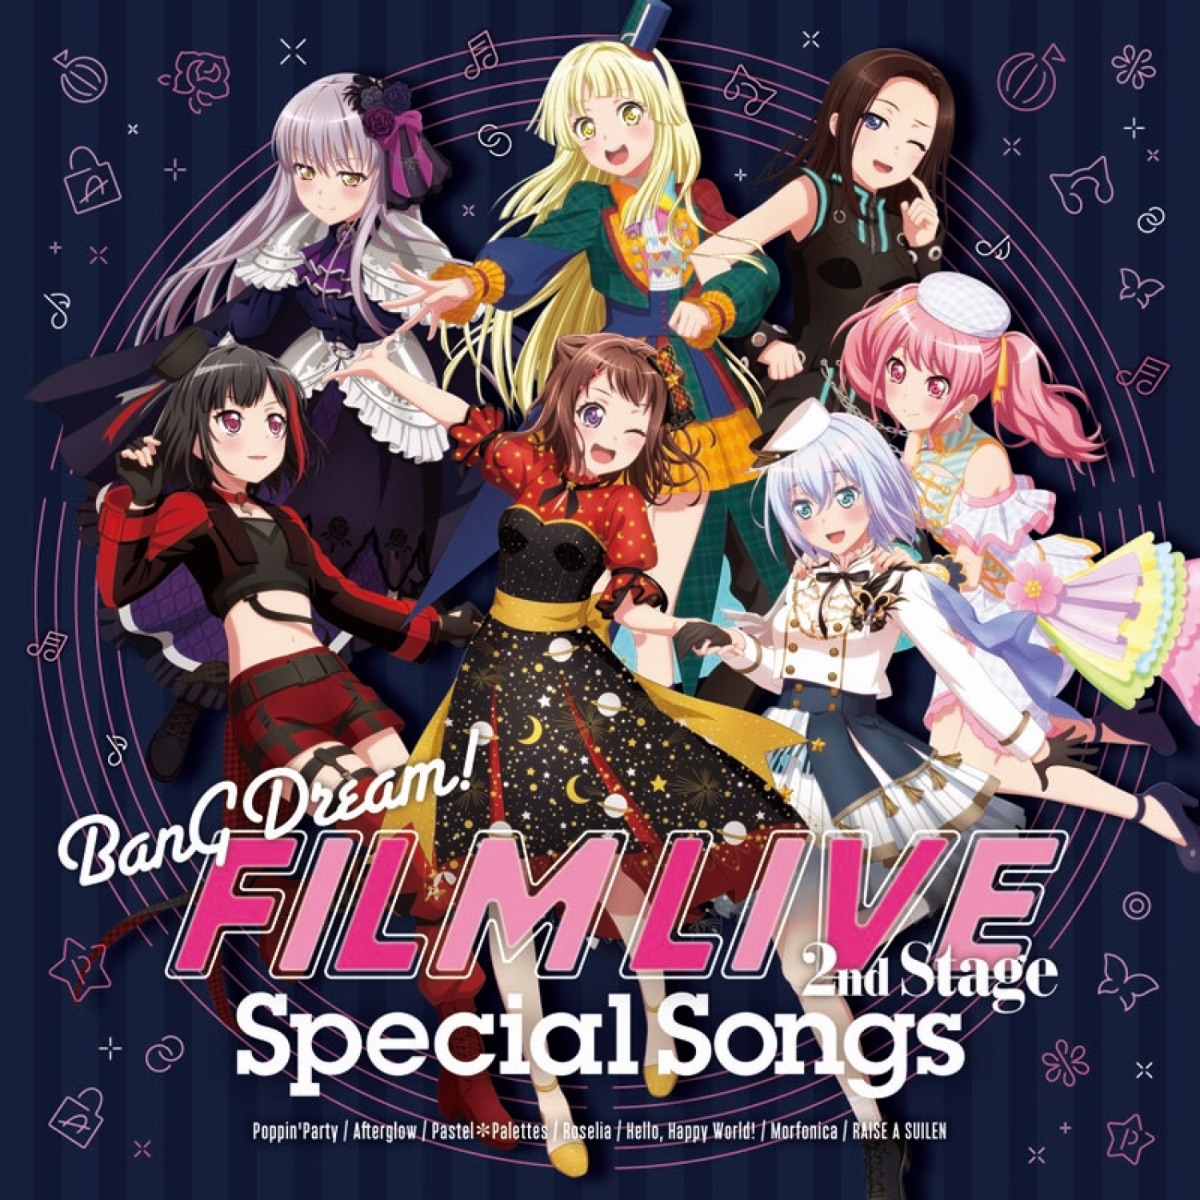 『RAISE A SUILEN×ハロー、ハッピーワールド！ - ラスハピーポー！』収録の『劇場版「BanG Dream! FILM LIVE 2nd Stage」Special Songs』ジャケット